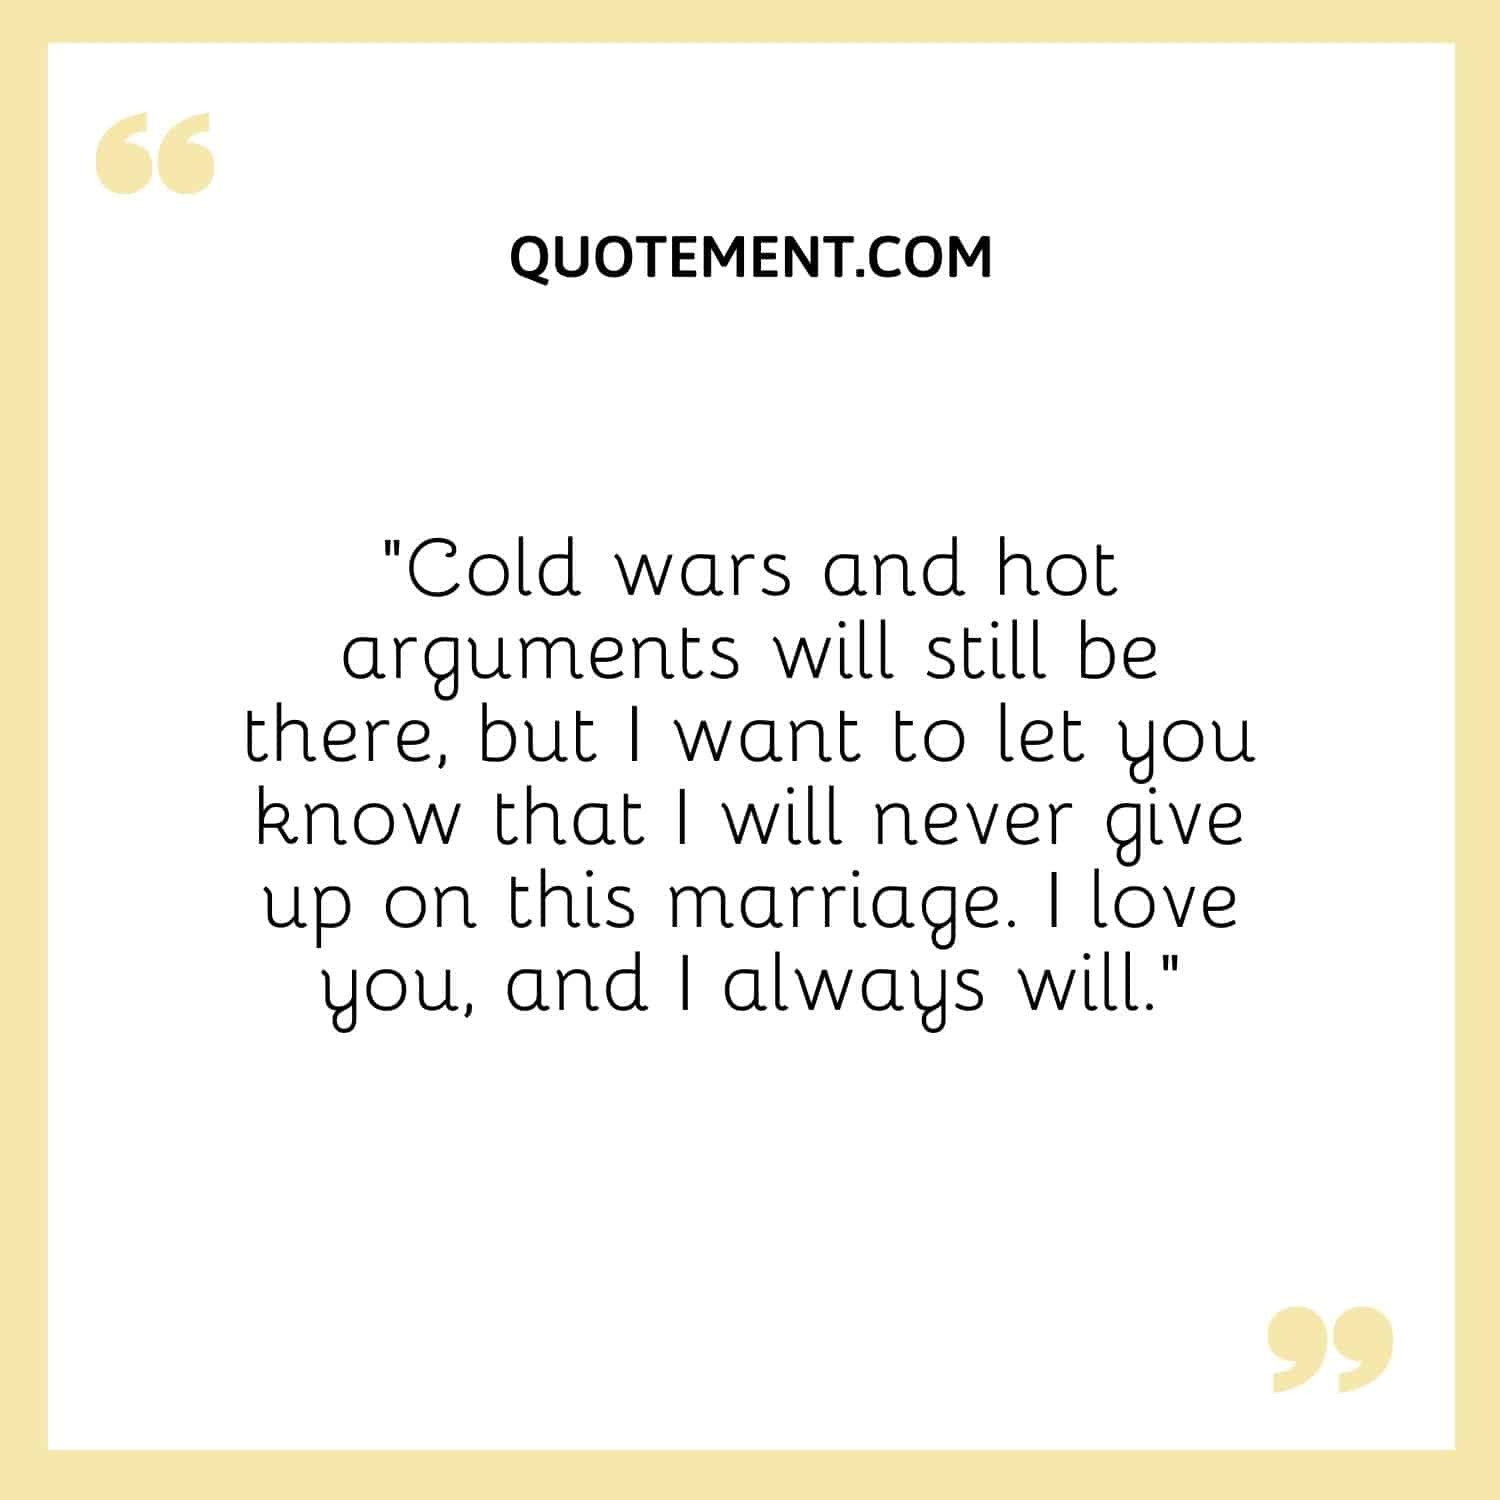 Cold wars and hot arguments will still be there, but I want to let you know that I will never give up on this marriage